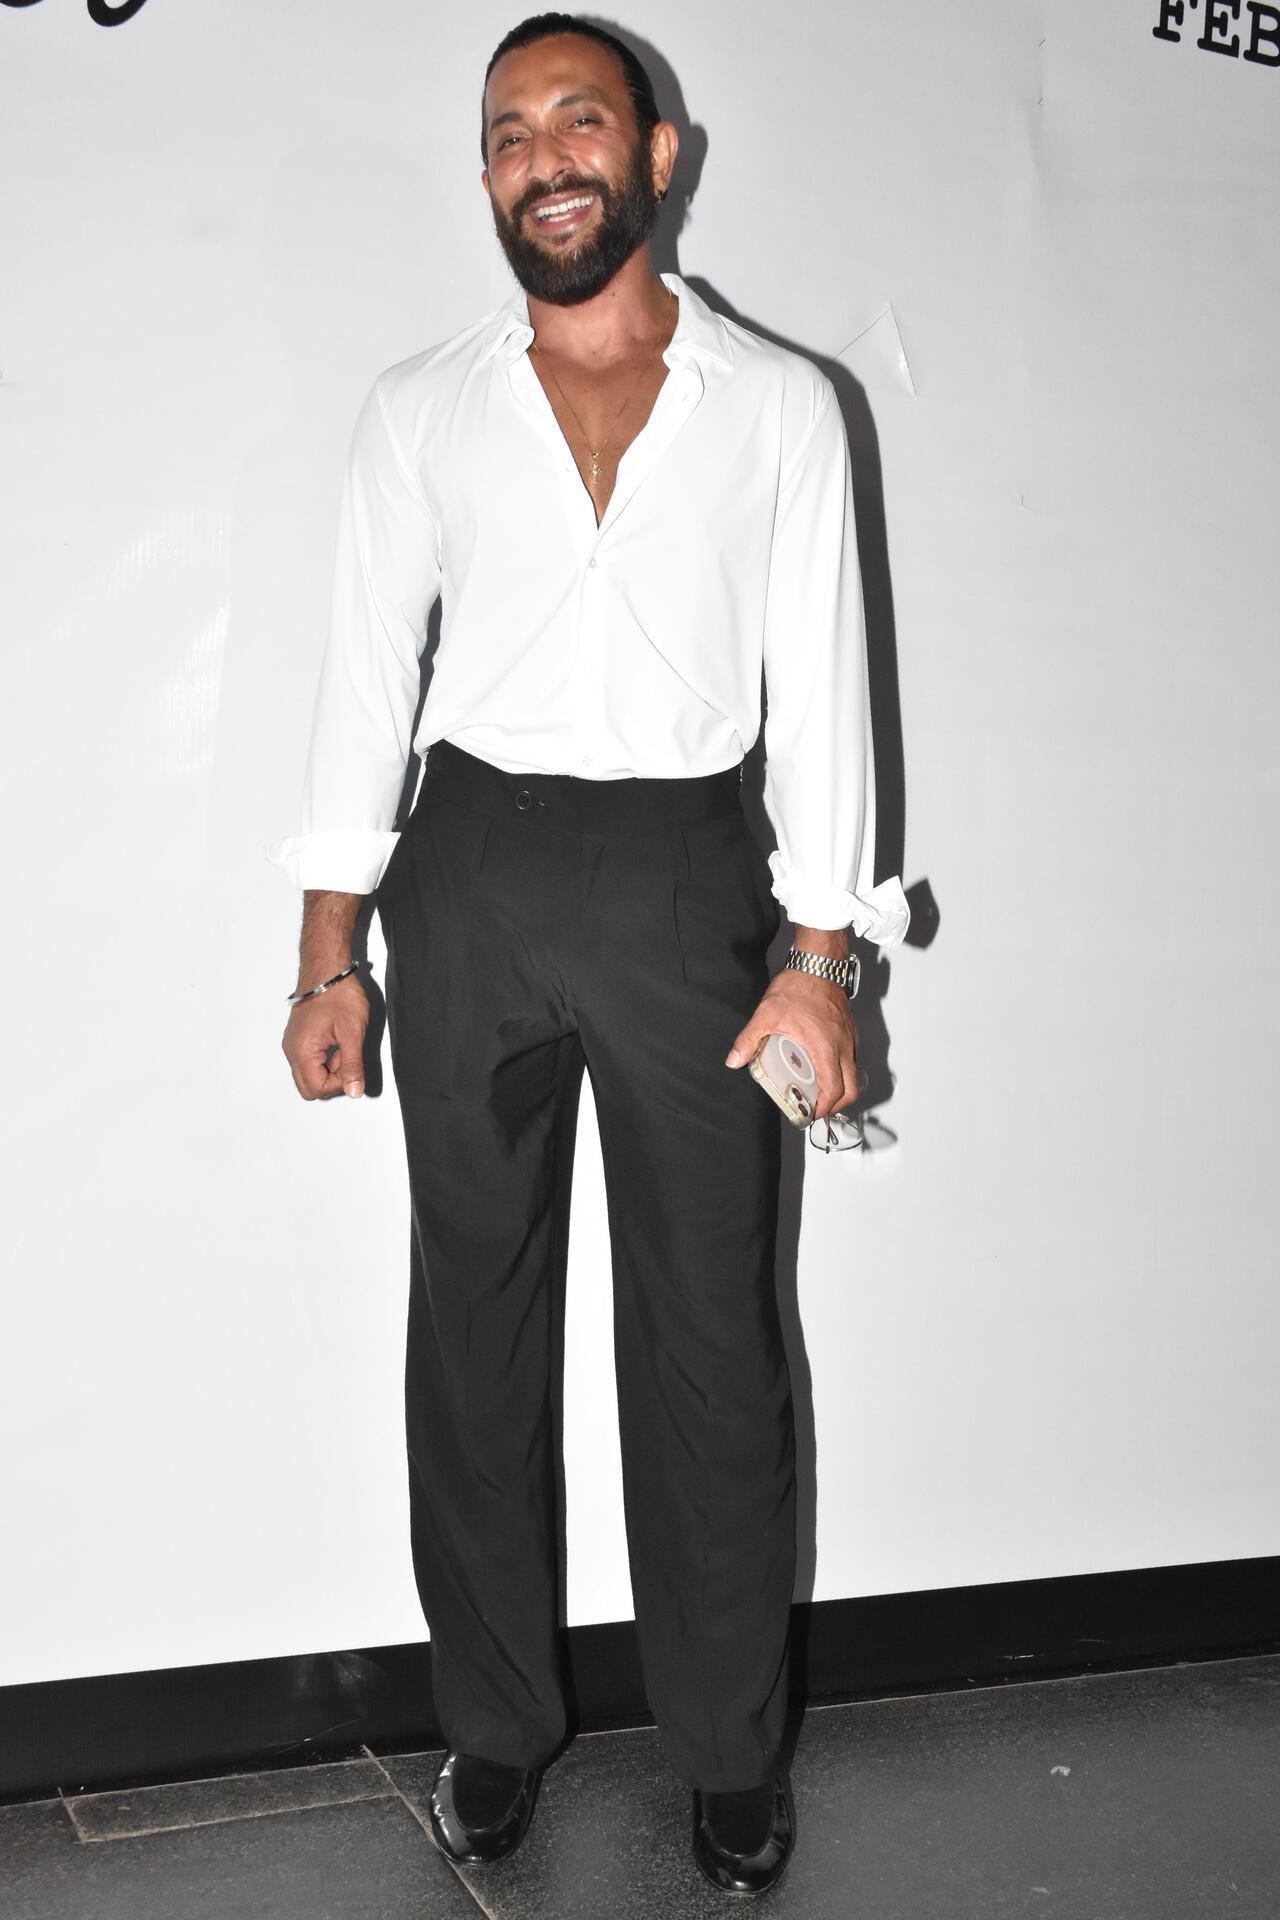 Choreographer Terence Lewis was all smiles as he attended the party wearing a crisp white shirt with black trousers